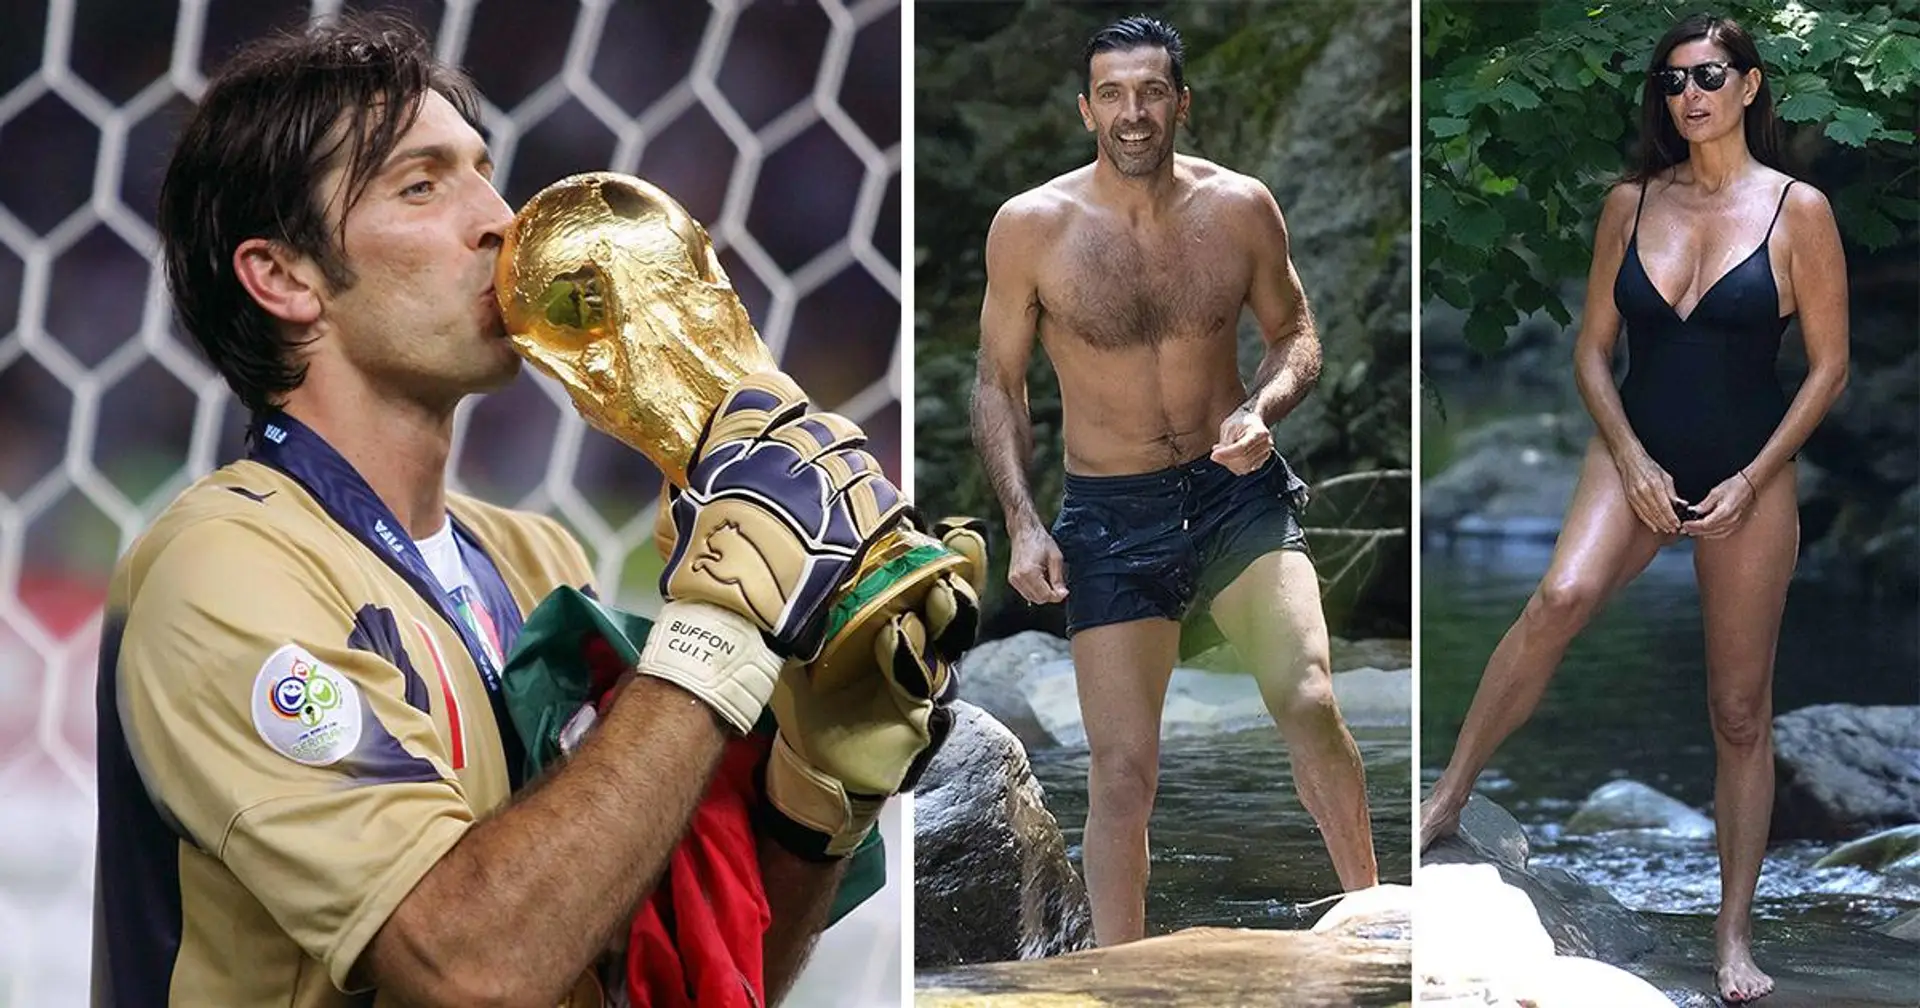 'I won a World Cup and 10 titles - but losing €10million was biggest mistake of my life': Buffon says he regrets about Juventus return